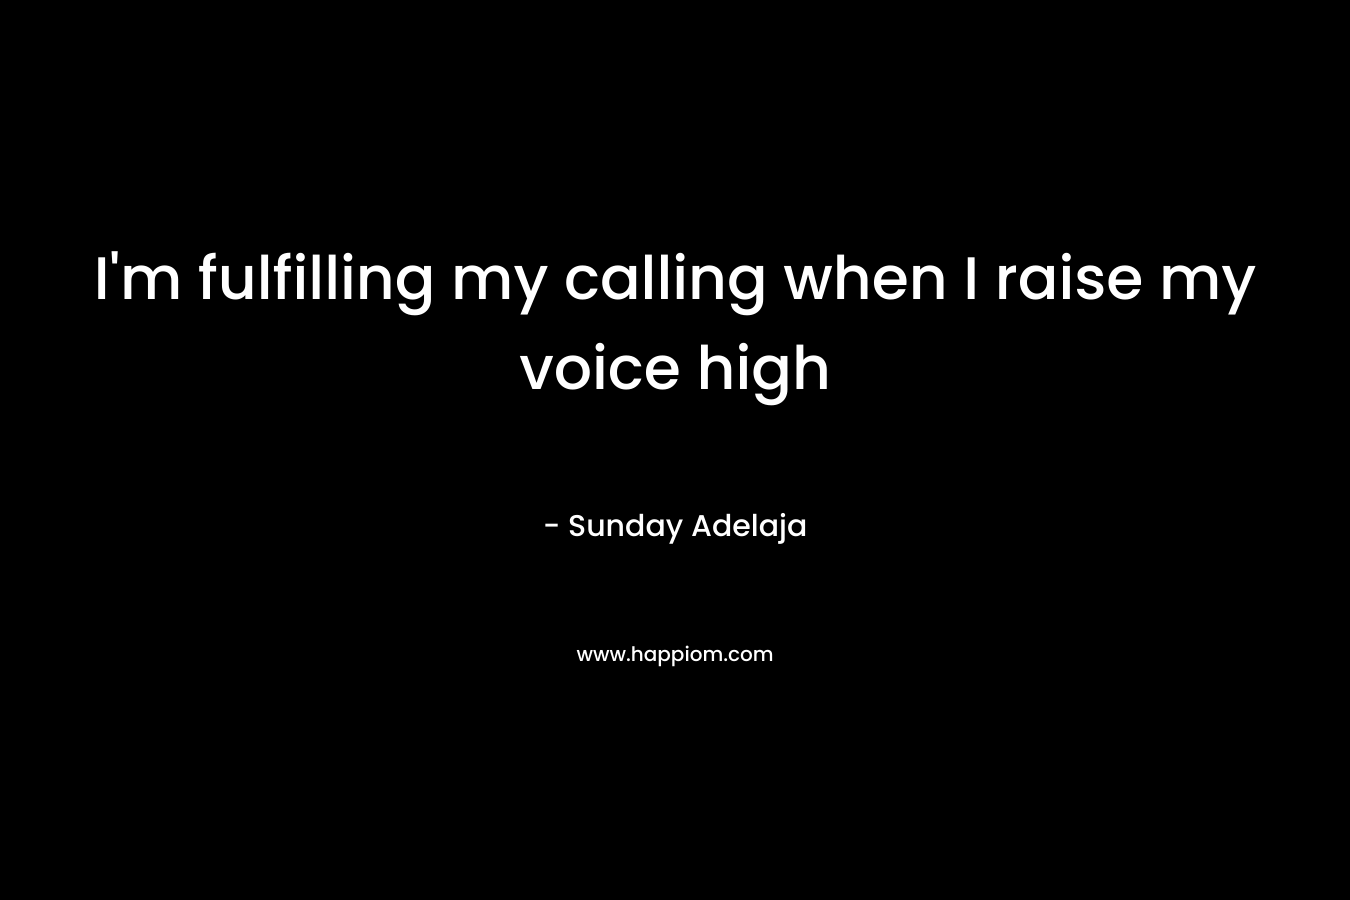 I'm fulfilling my calling when I raise my voice high